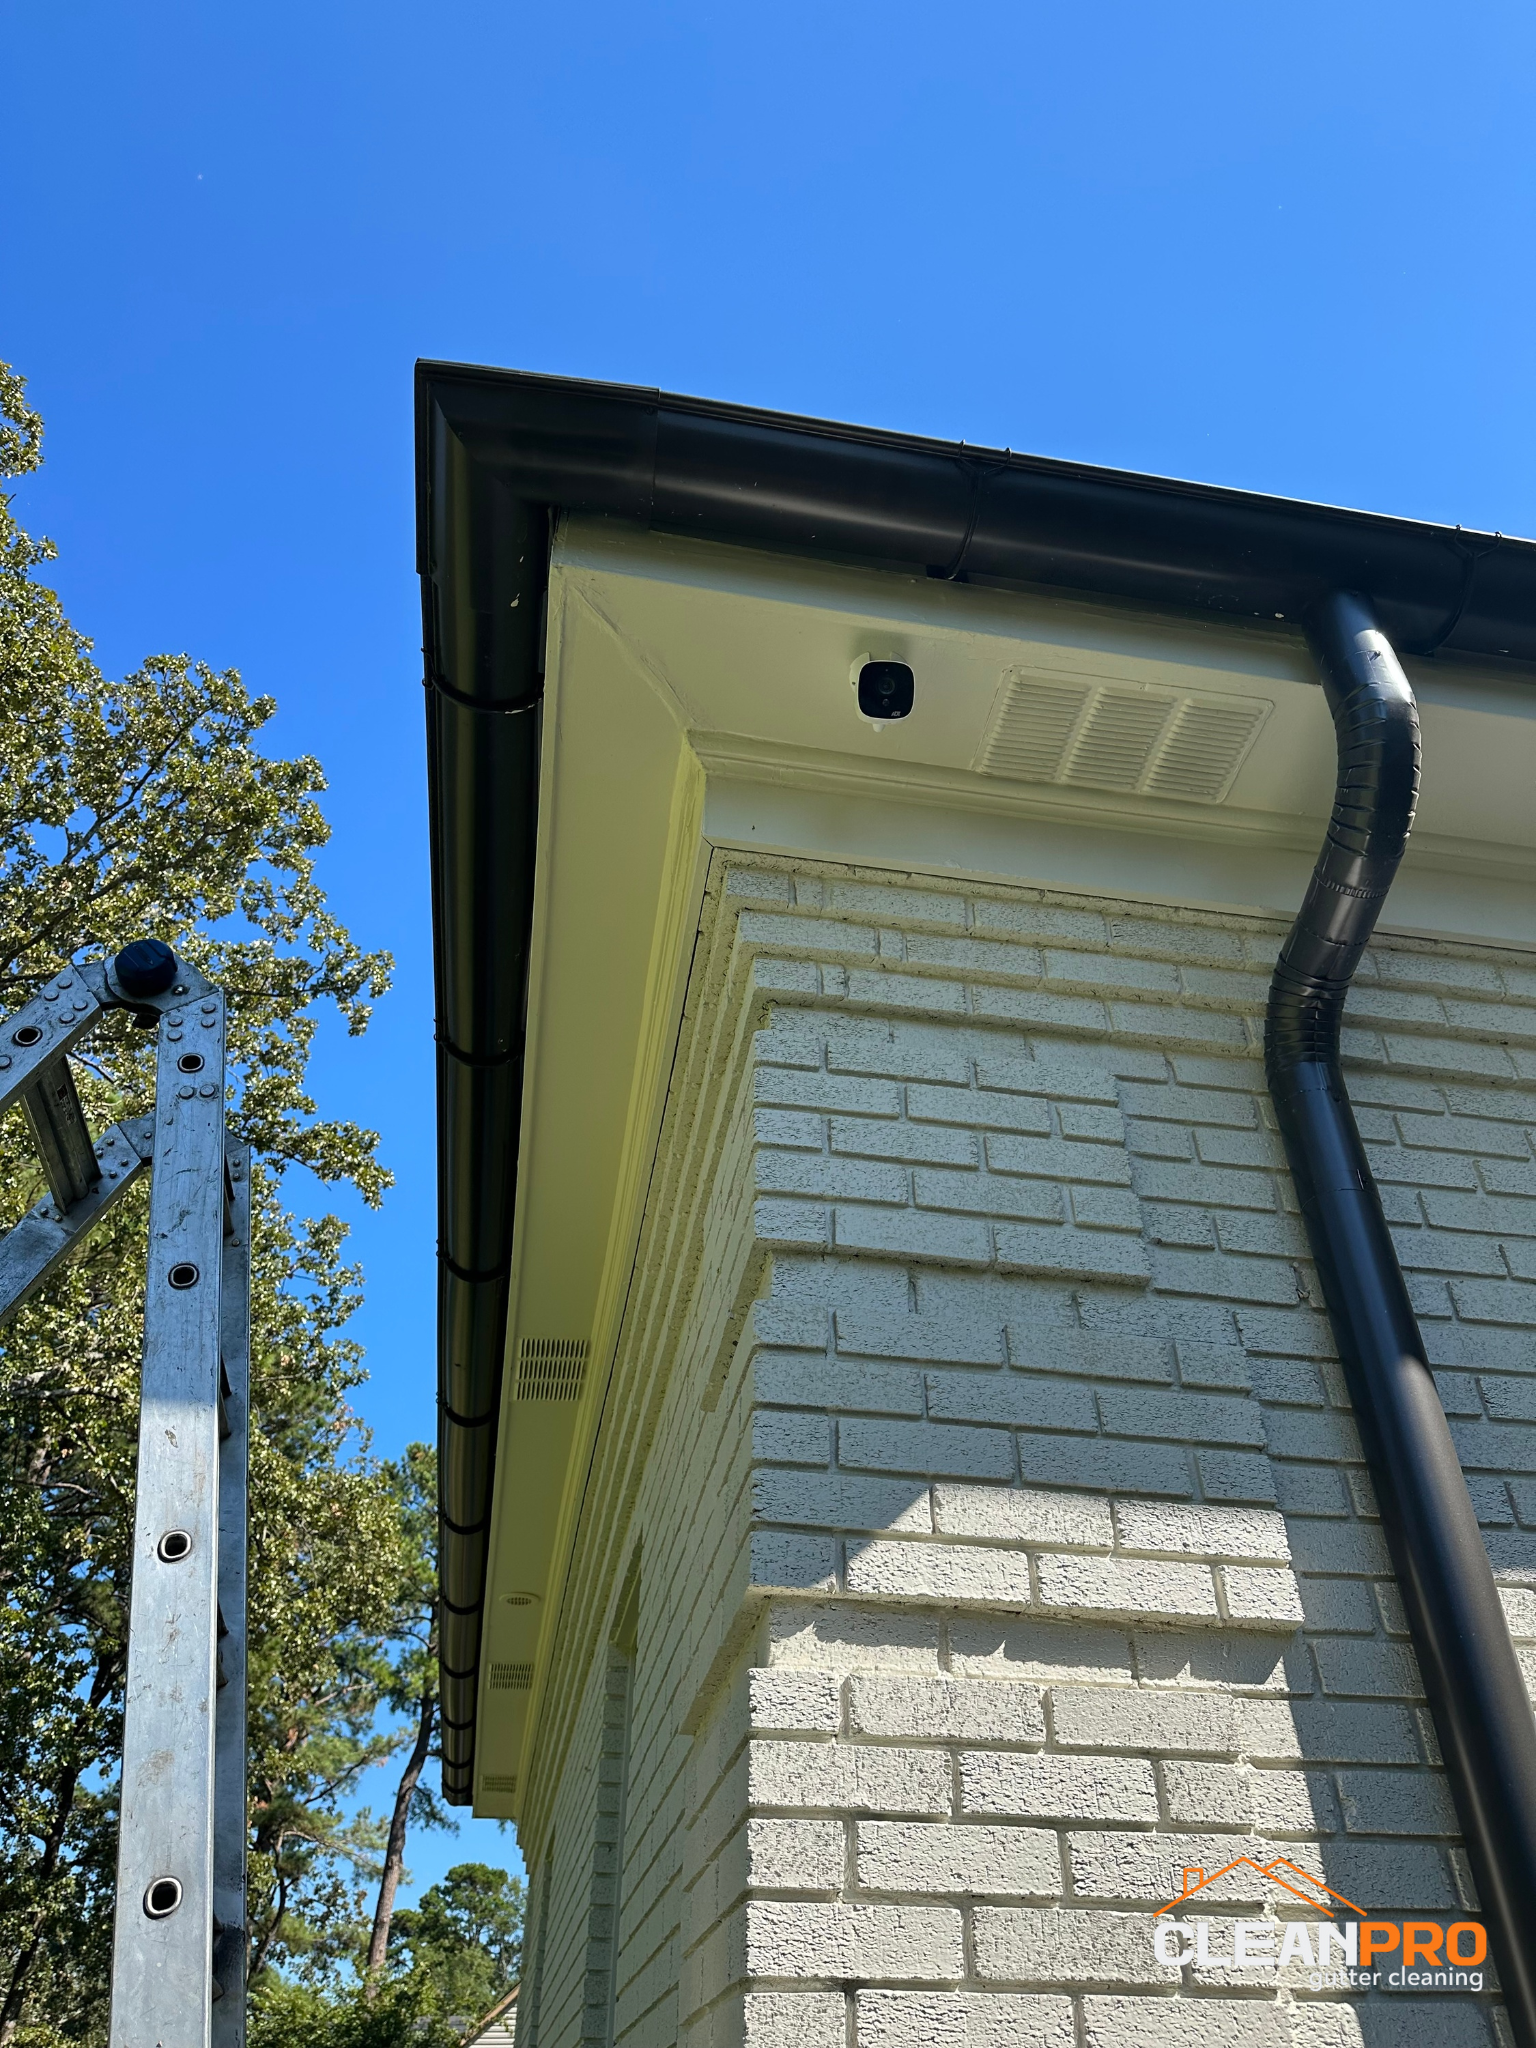 Local Gutter Cleaning in Franklin